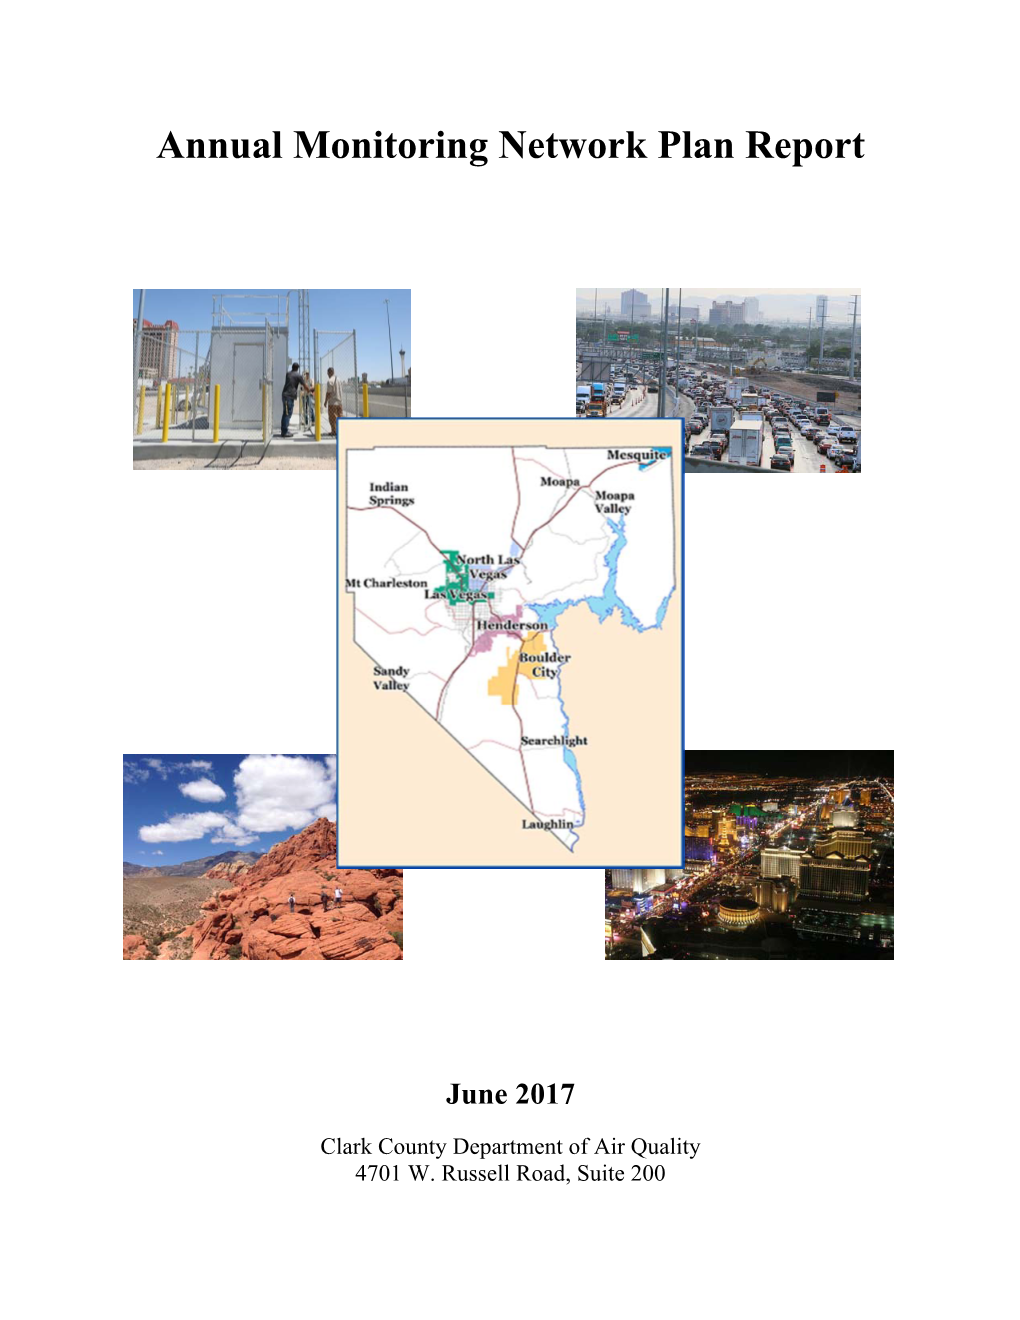 Clark County 2017 Annual Monitoring Network Plan Report